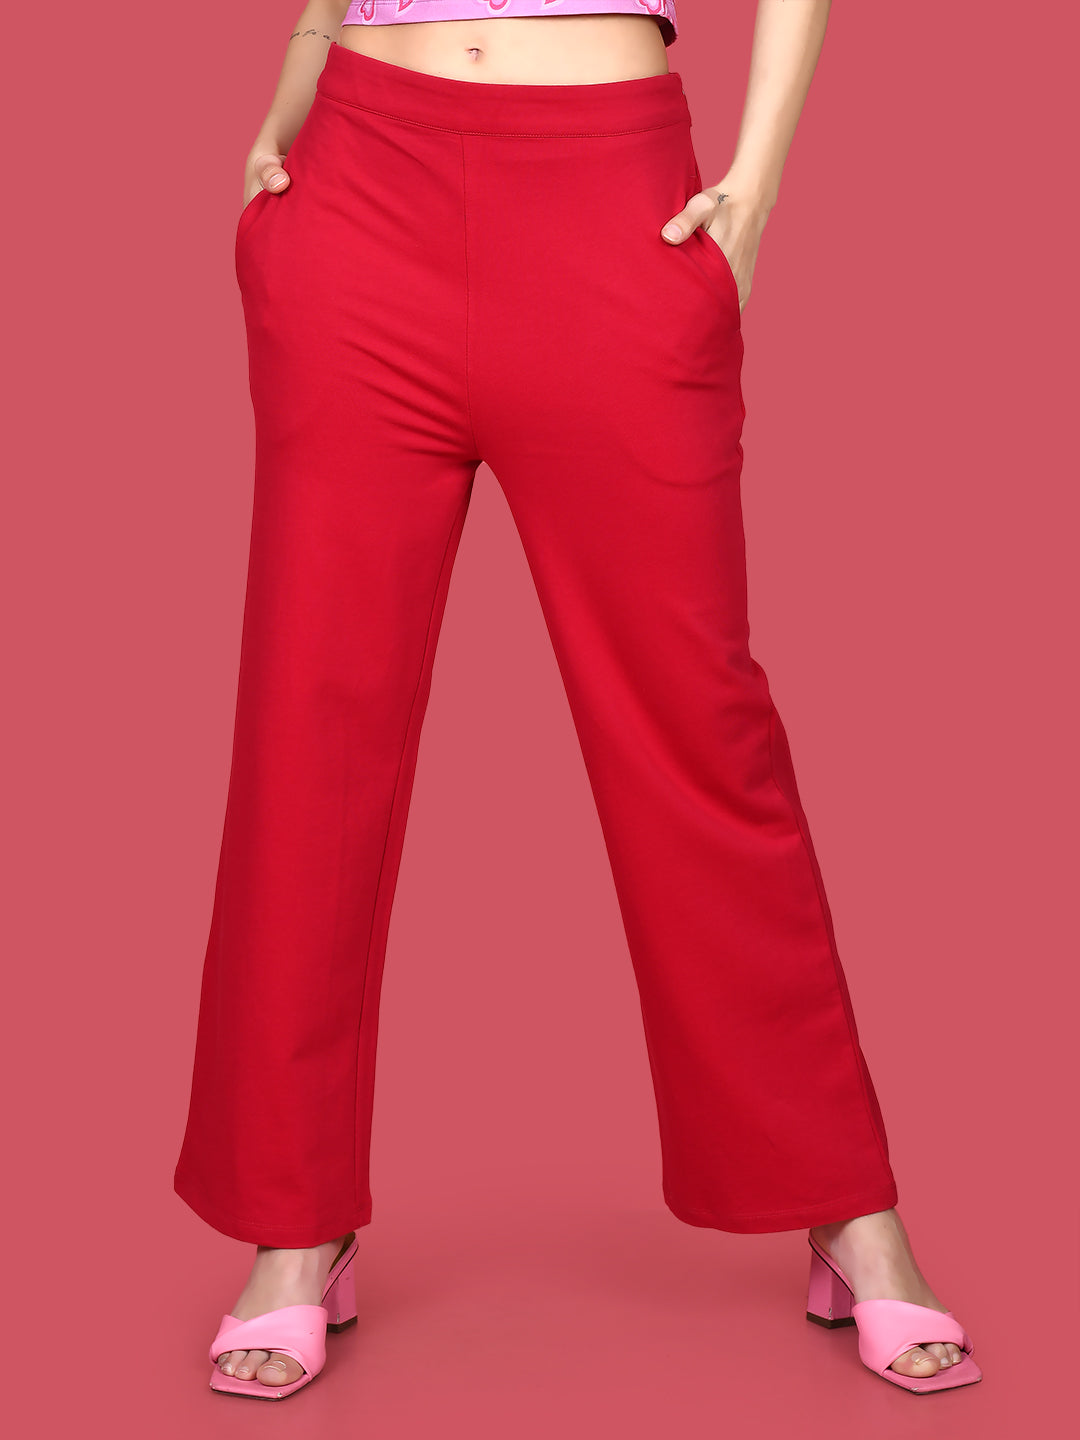 Buy Red High Rise Pants For Women Online in India | VeroModa